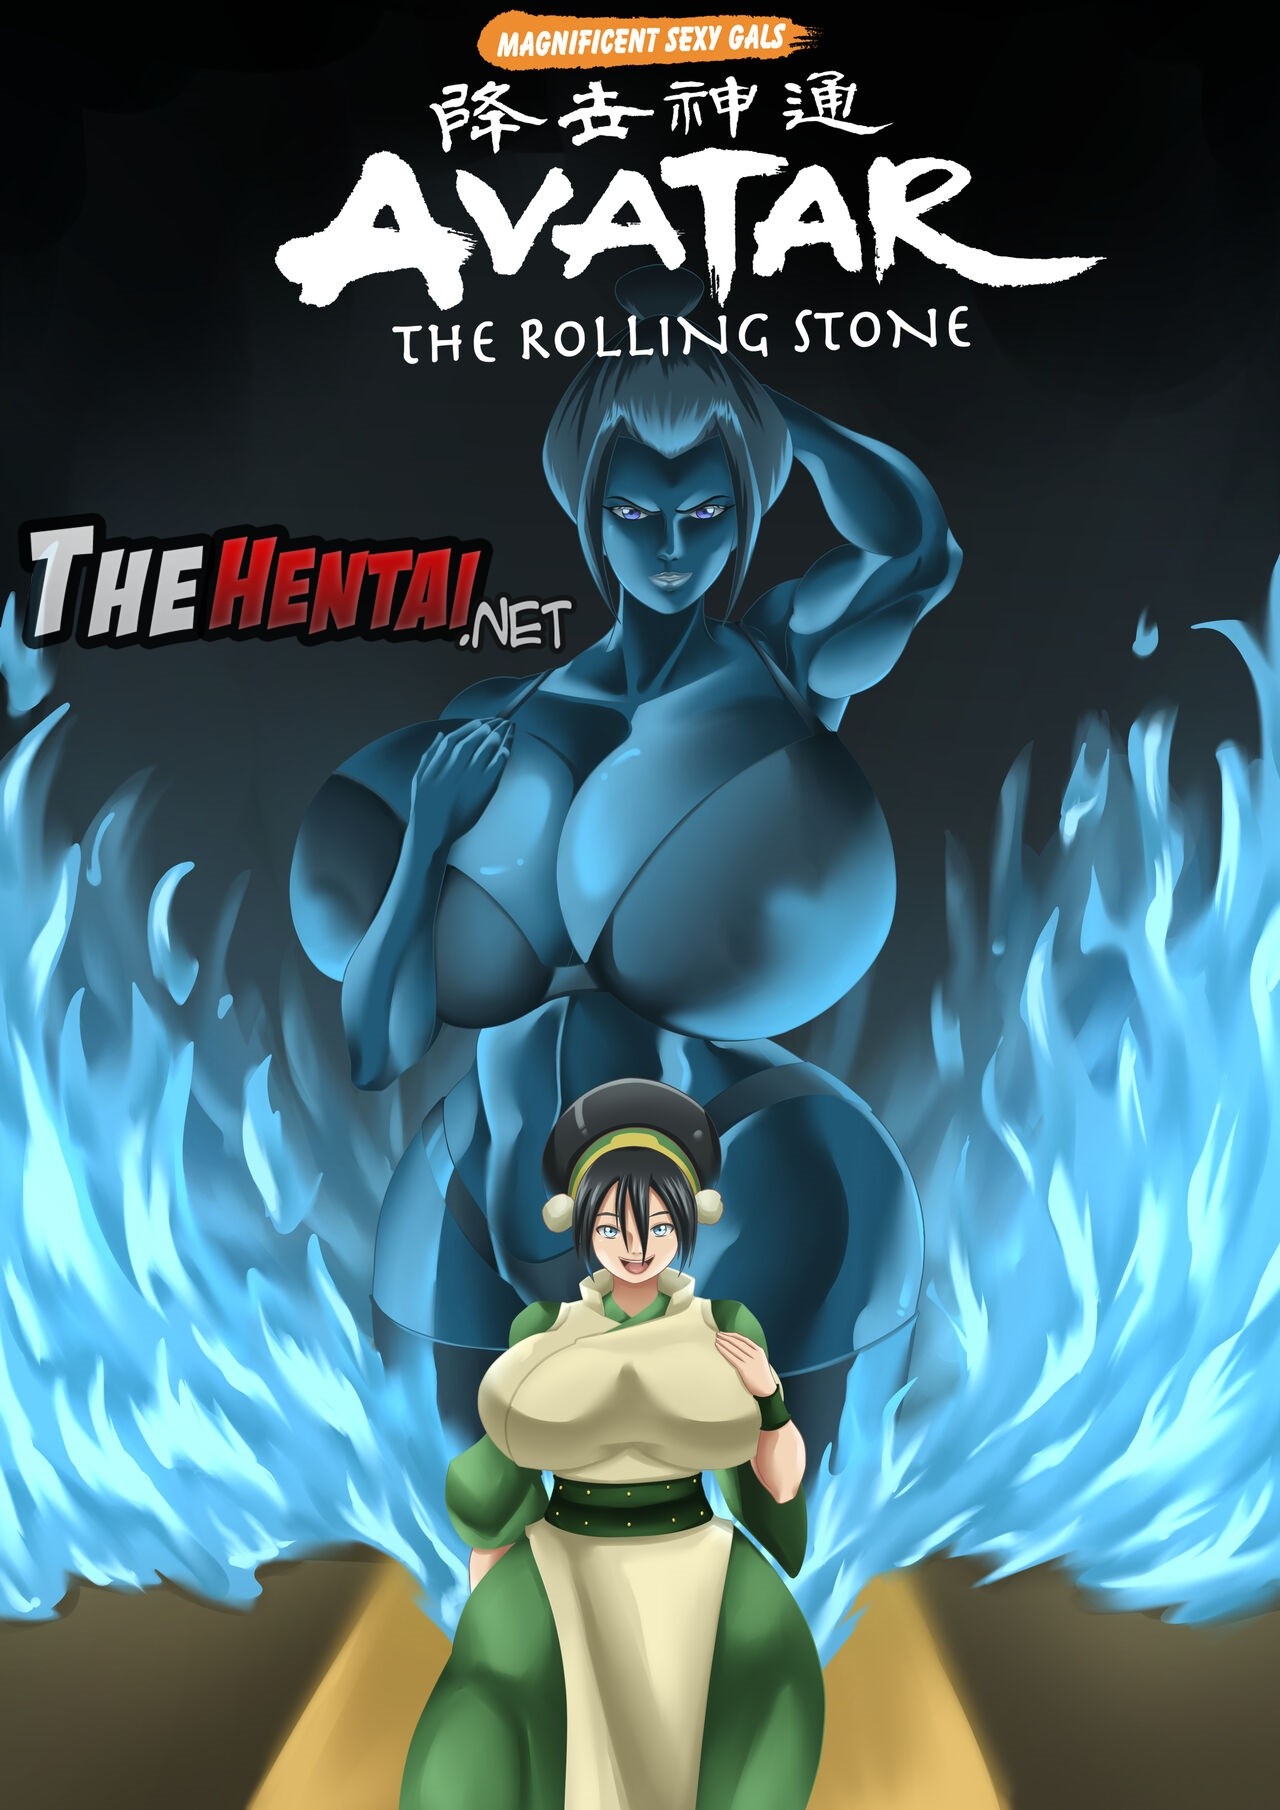 The Rolling Stone  Hentai pt-br 01